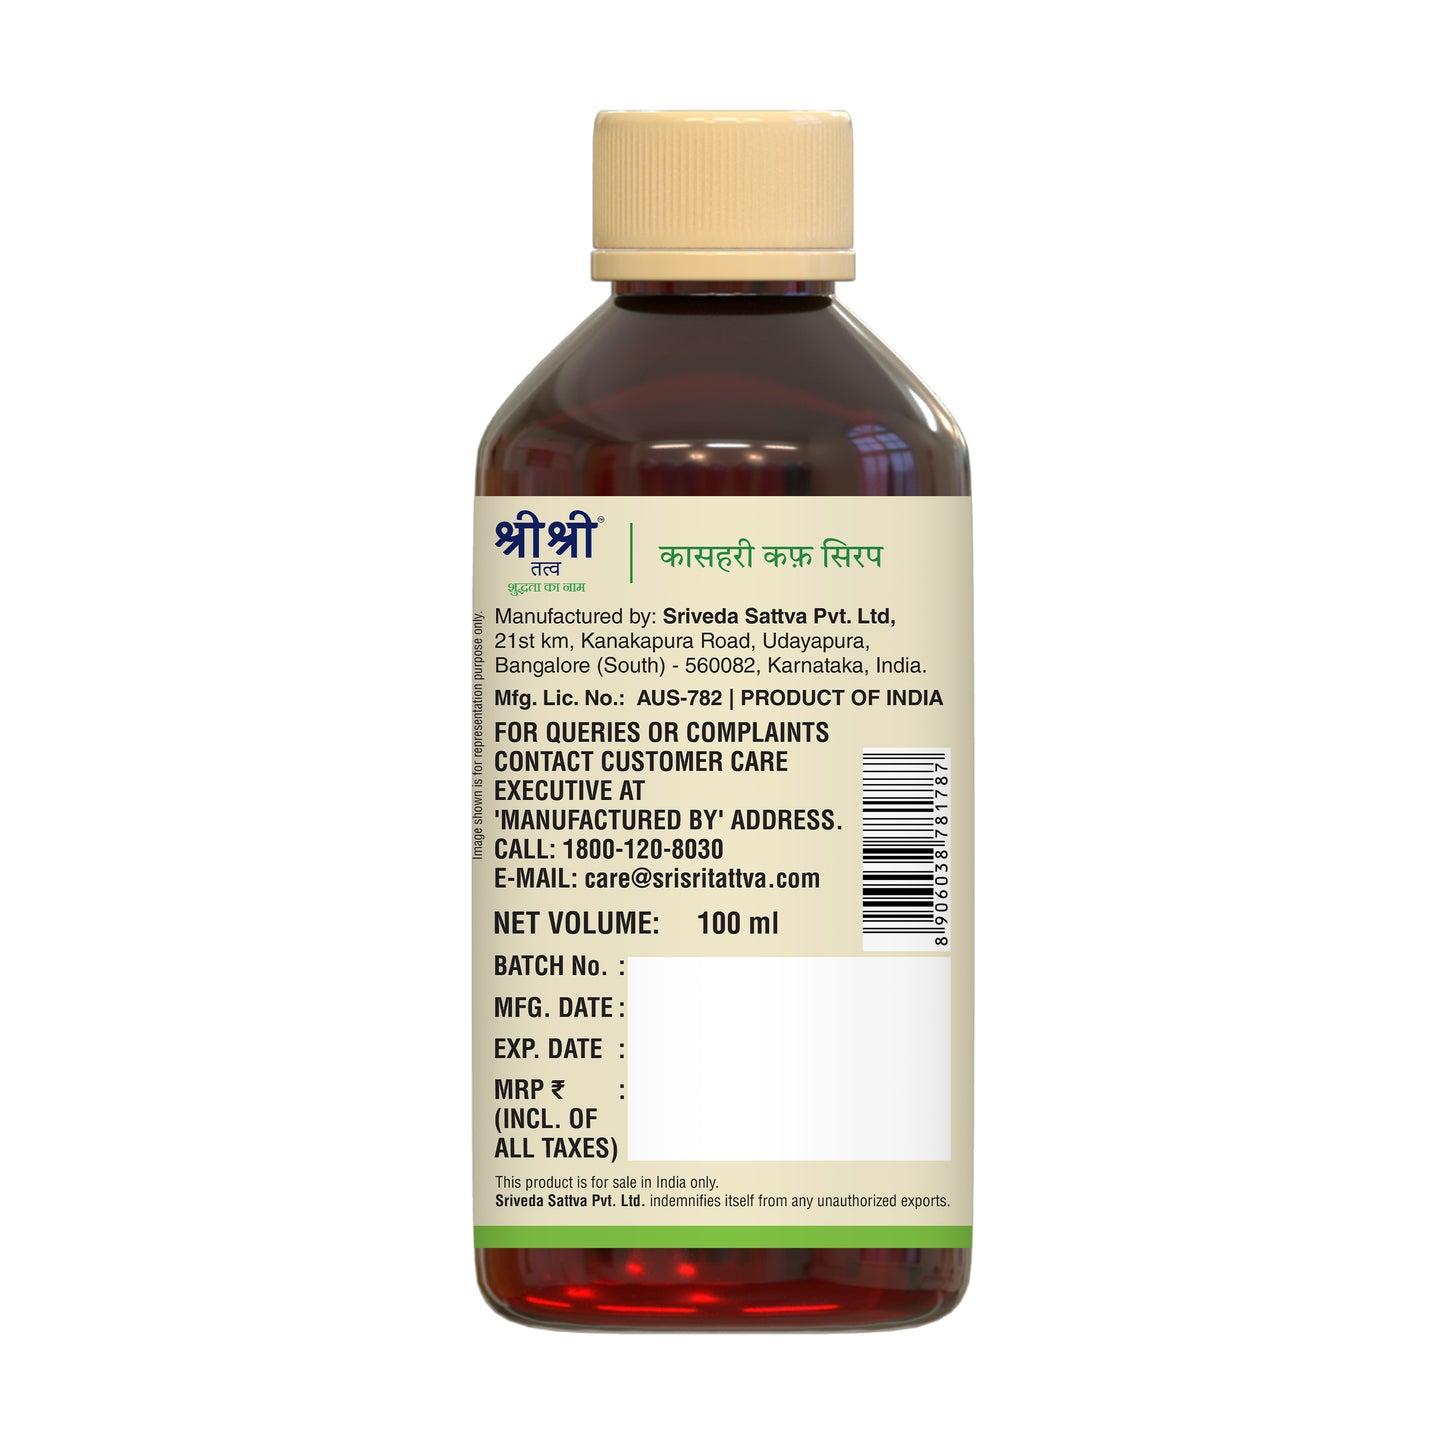 Kasahari Cough Syrup | A Unique Herbal Formulation | Offers Quick Relief From Both Dry And Allergic Cough | 100 ml